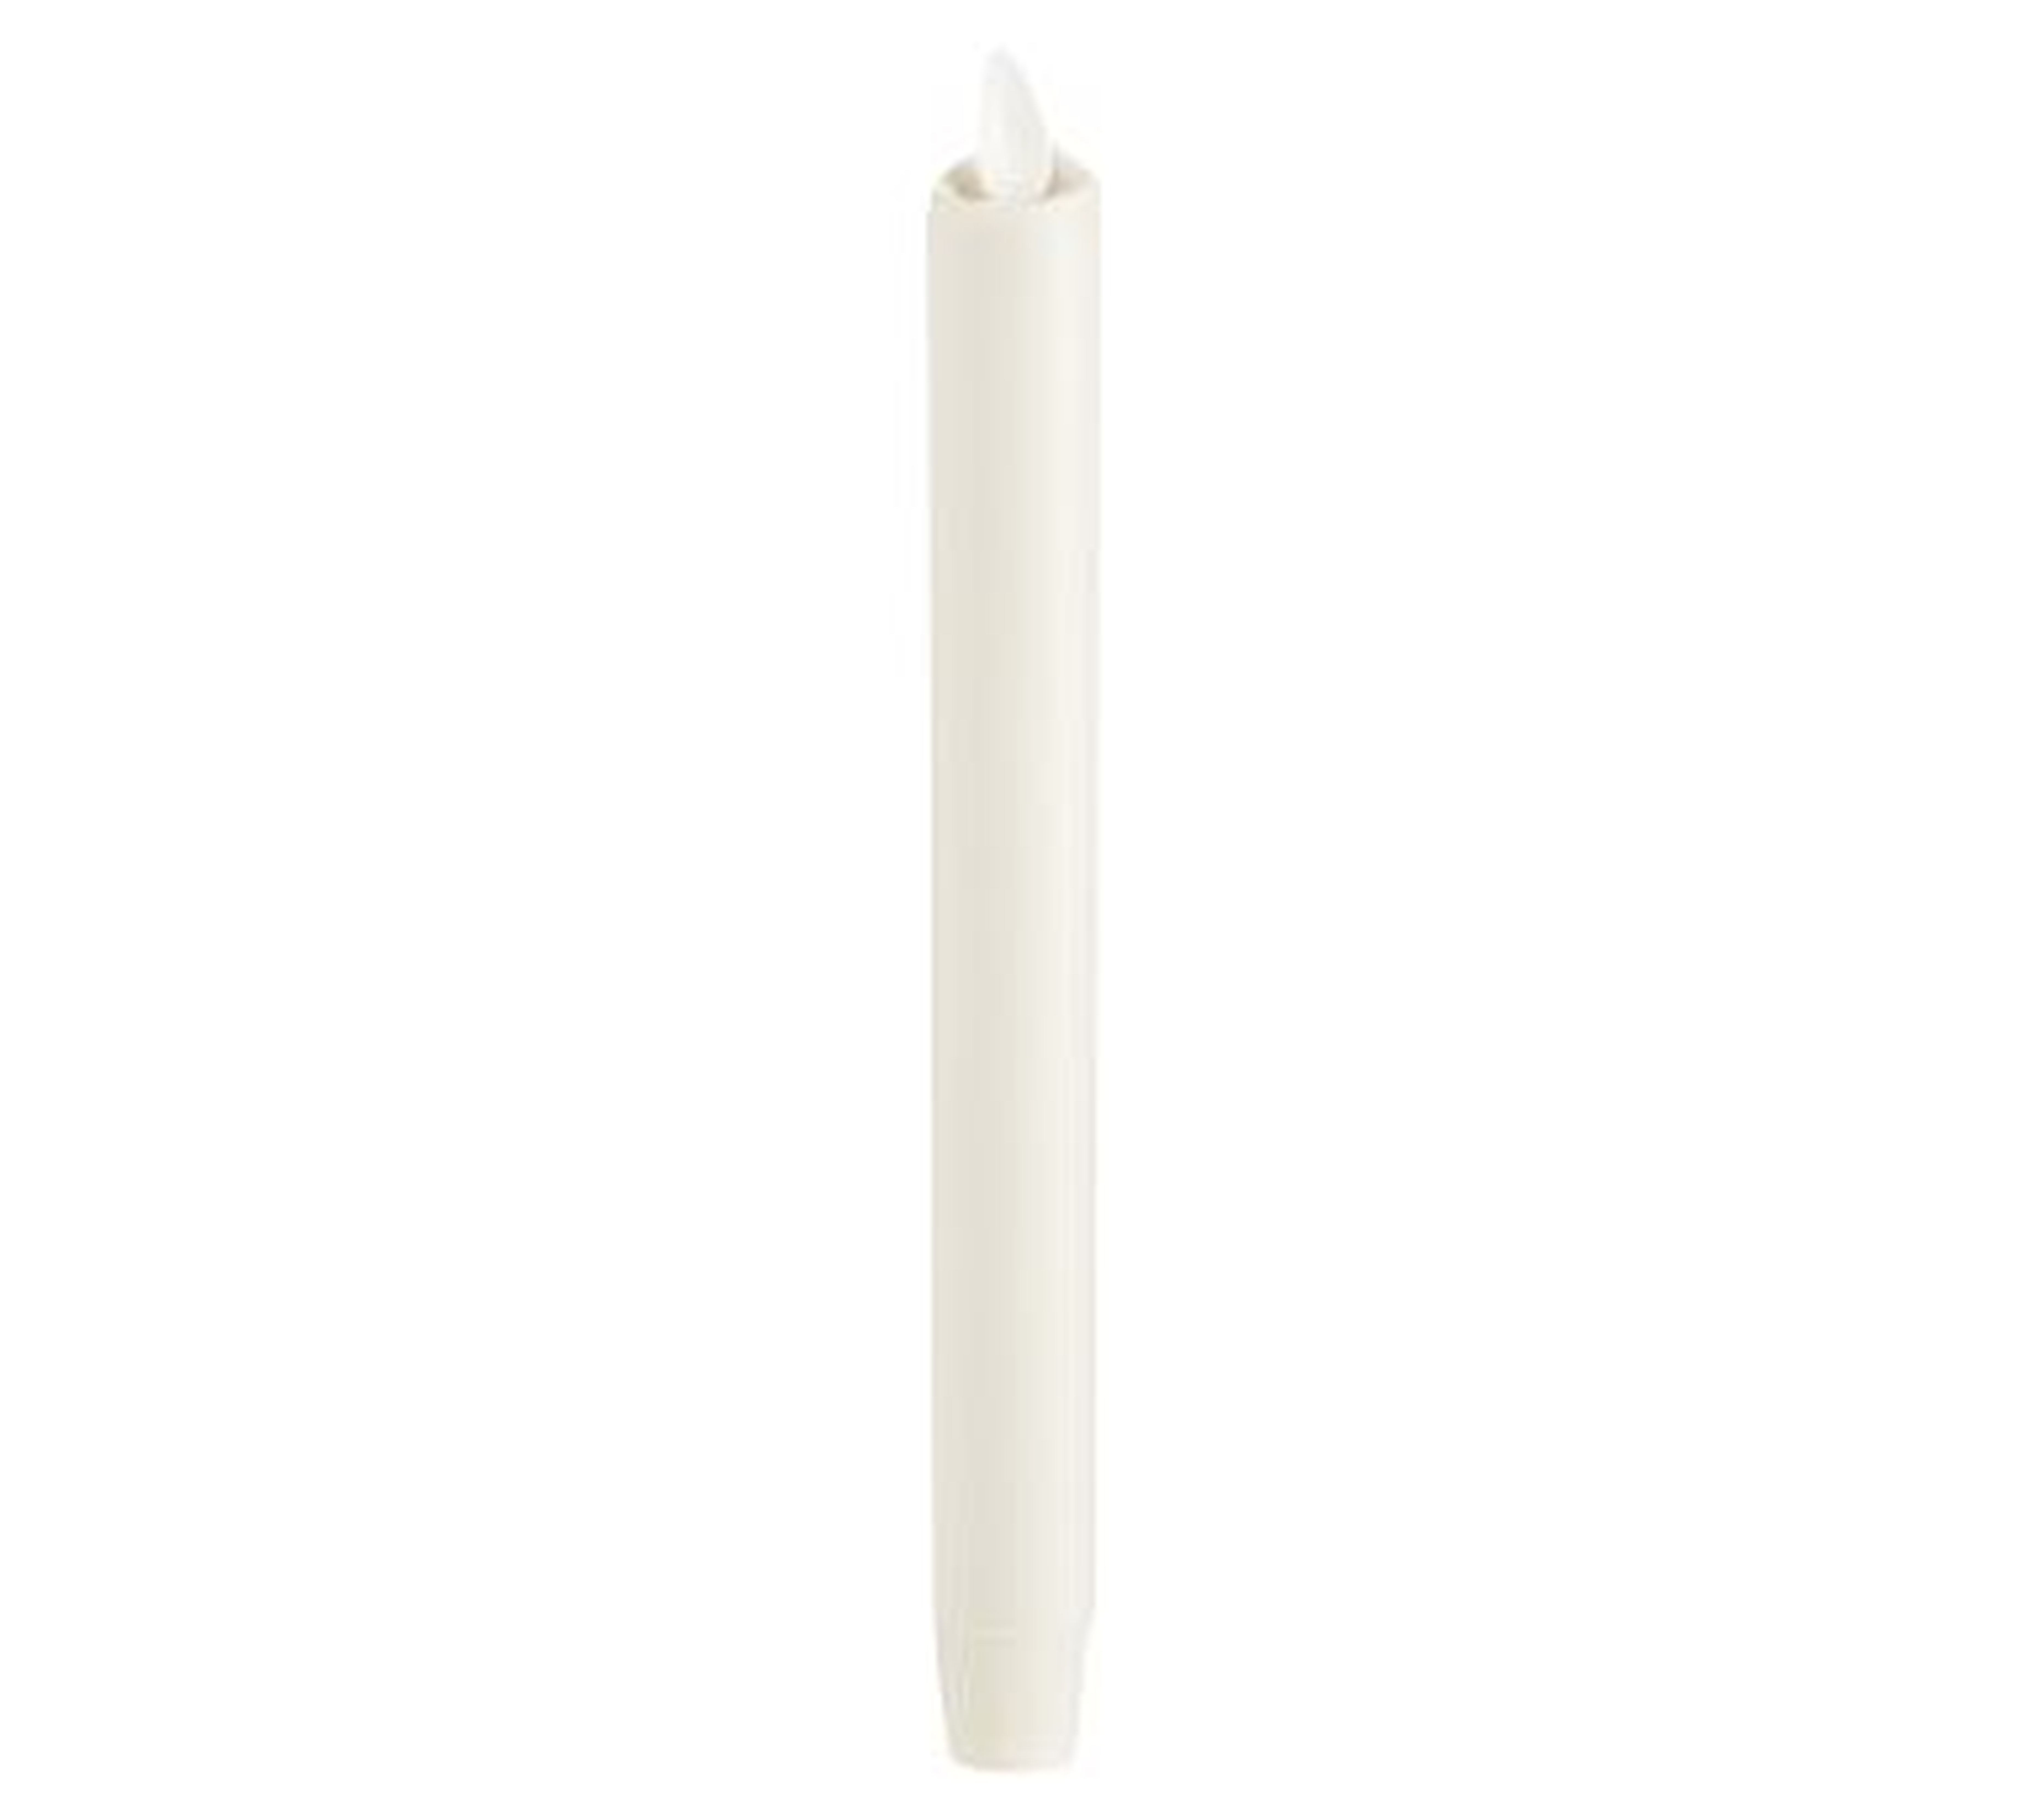 Premium Flickering Flameless Wax Taper Candle, Single, 8" - White - Pottery Barn